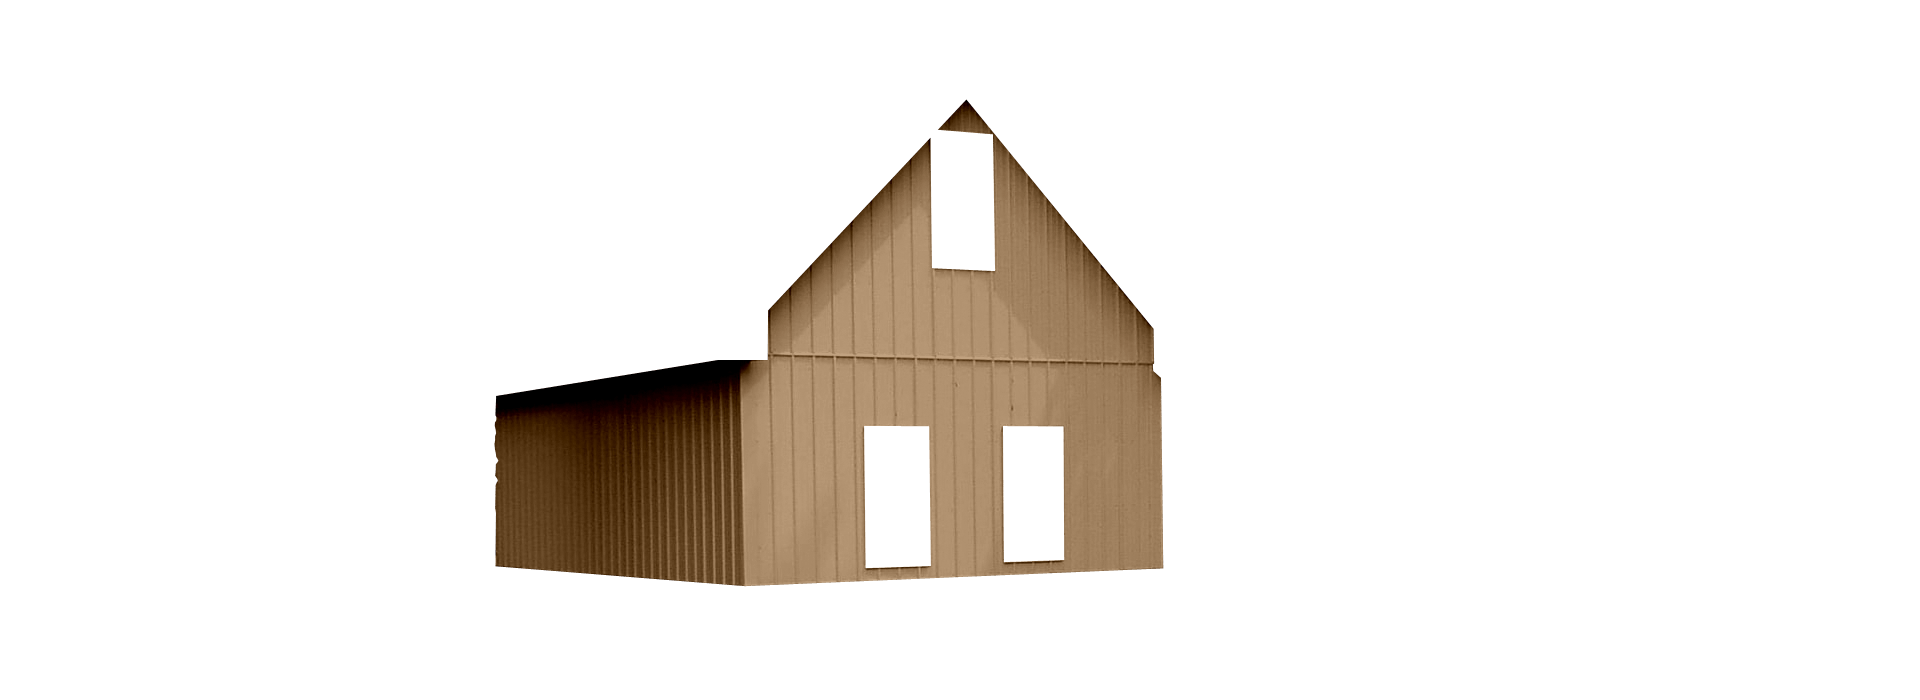 Agriculture color selector lifetite. Clipart barn barn roof